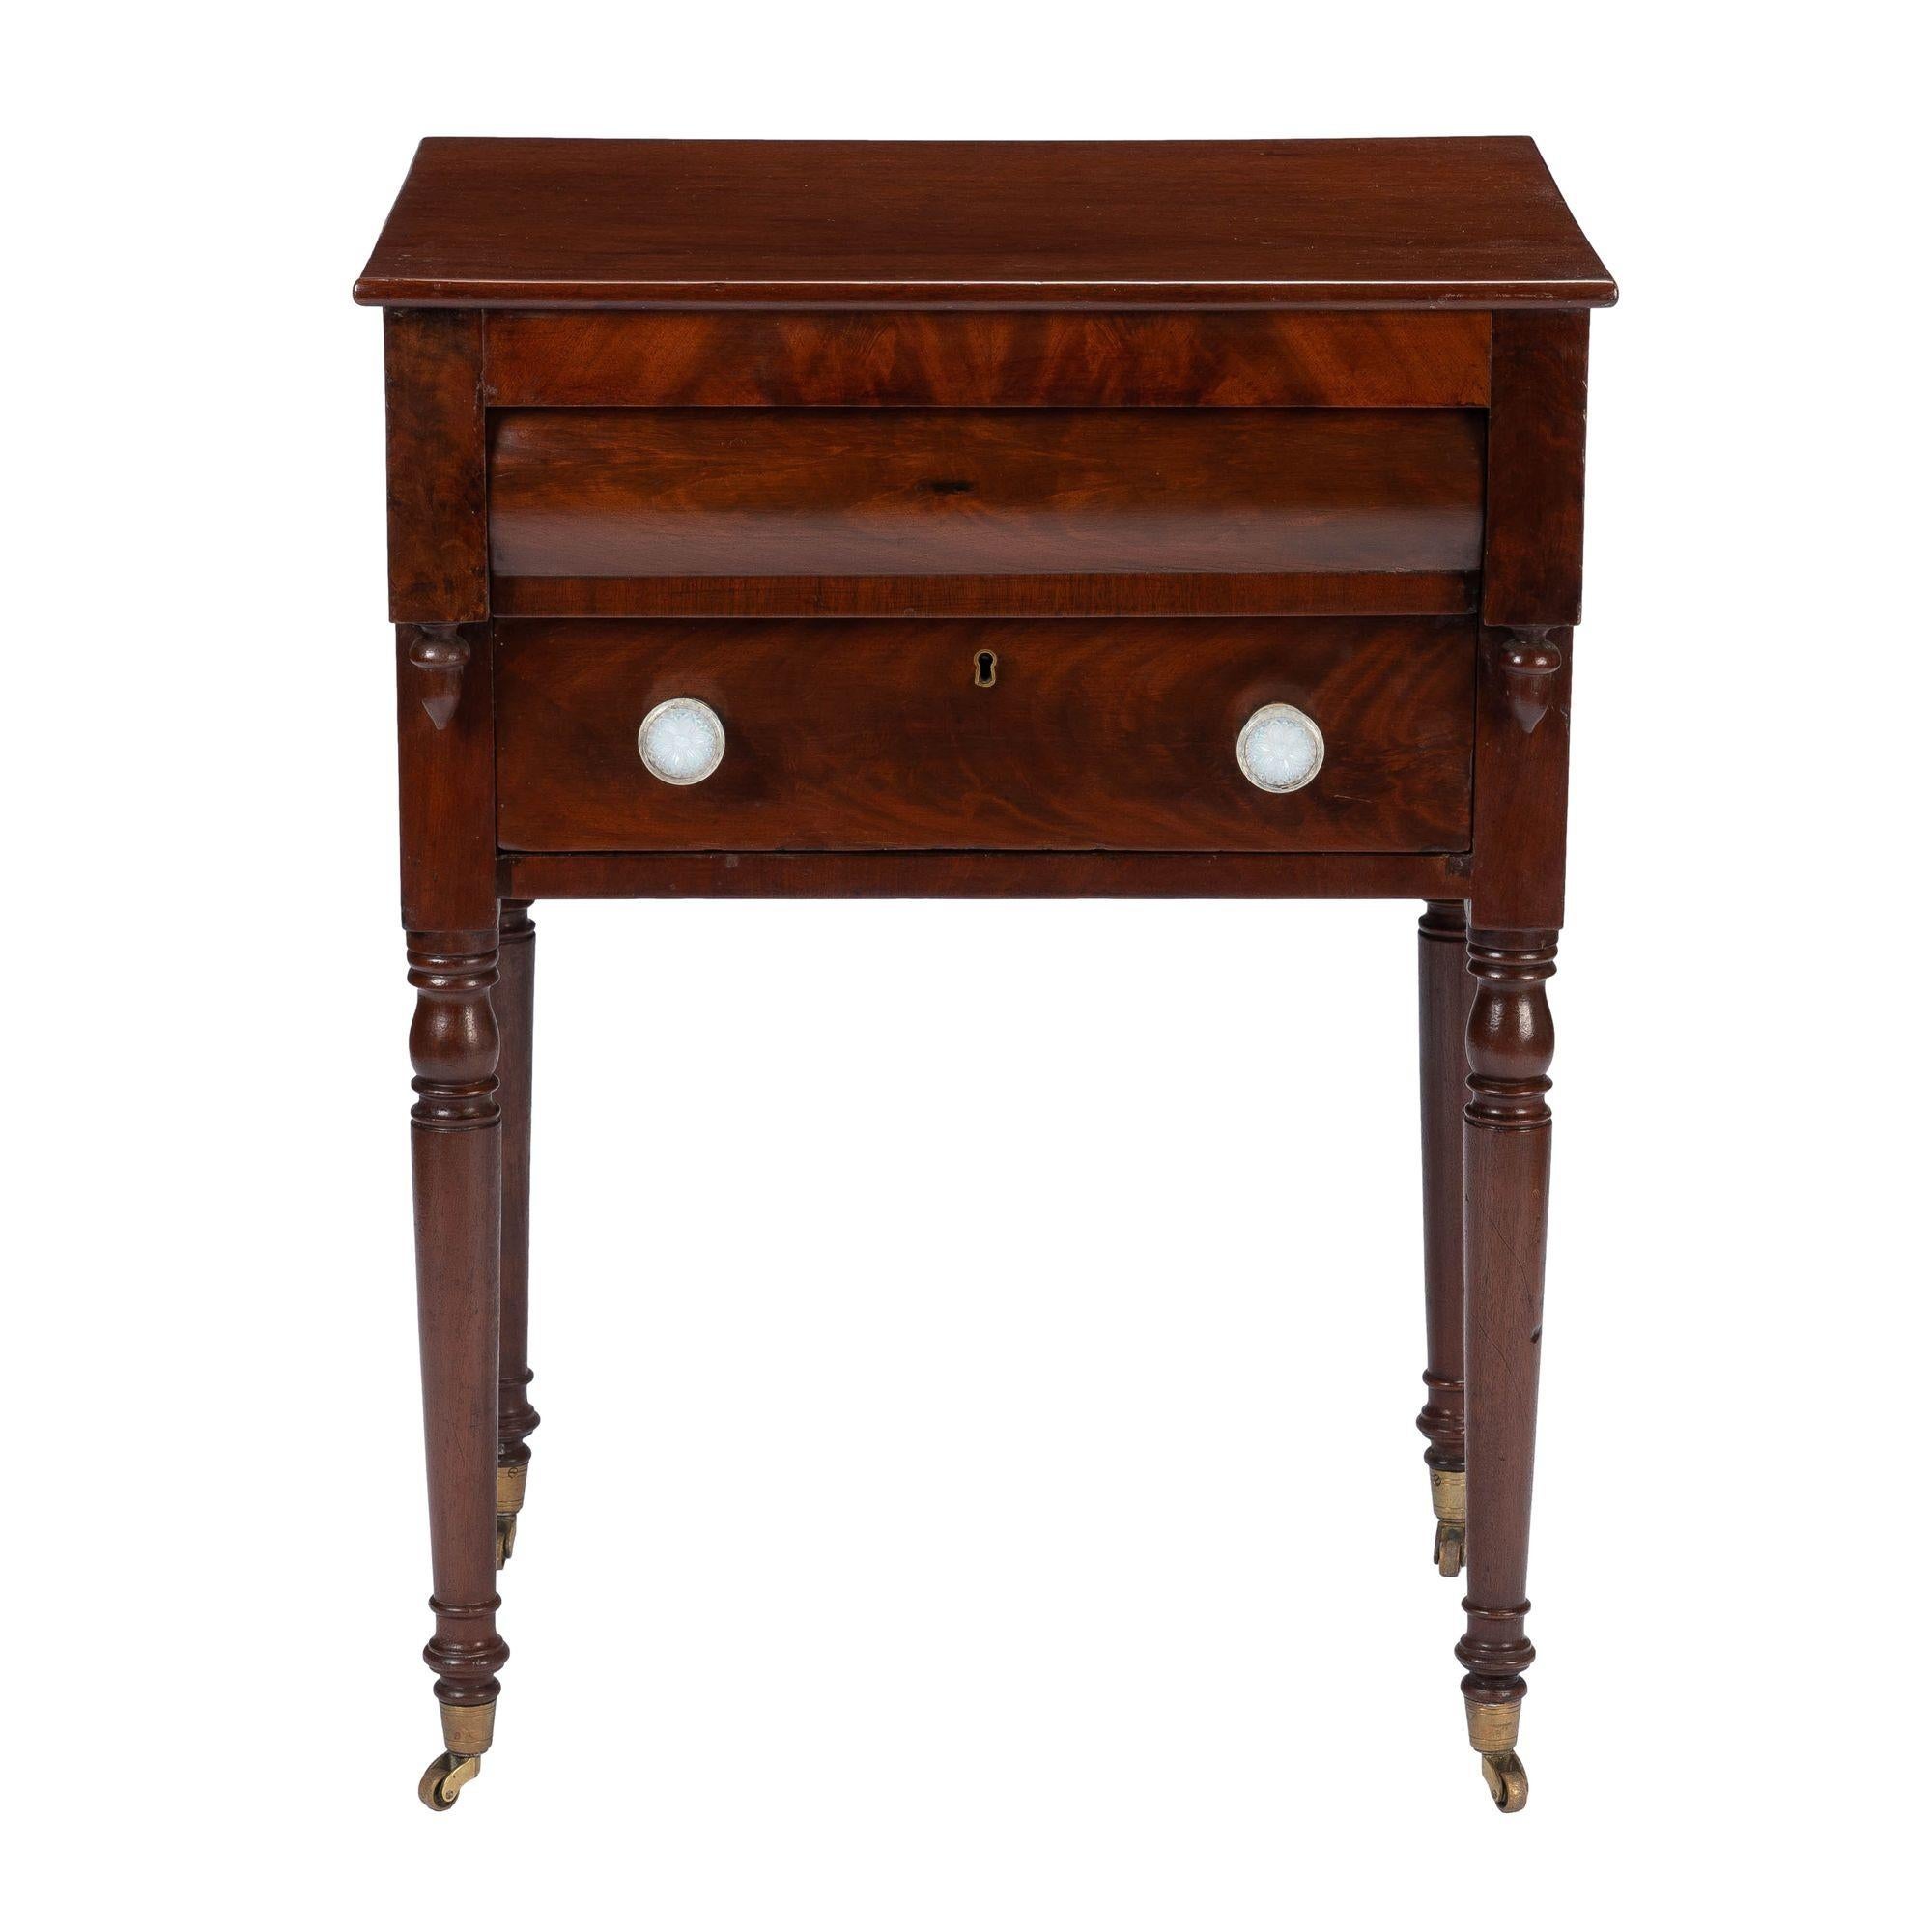 American Sheraton two drawer mahogany and book matched mahogany veneered work table. The projecting blind pillowed top drawer creates a recess for the flat front lower drawer, which is fitted with pressed opaline glass drawer pulls. The projecting